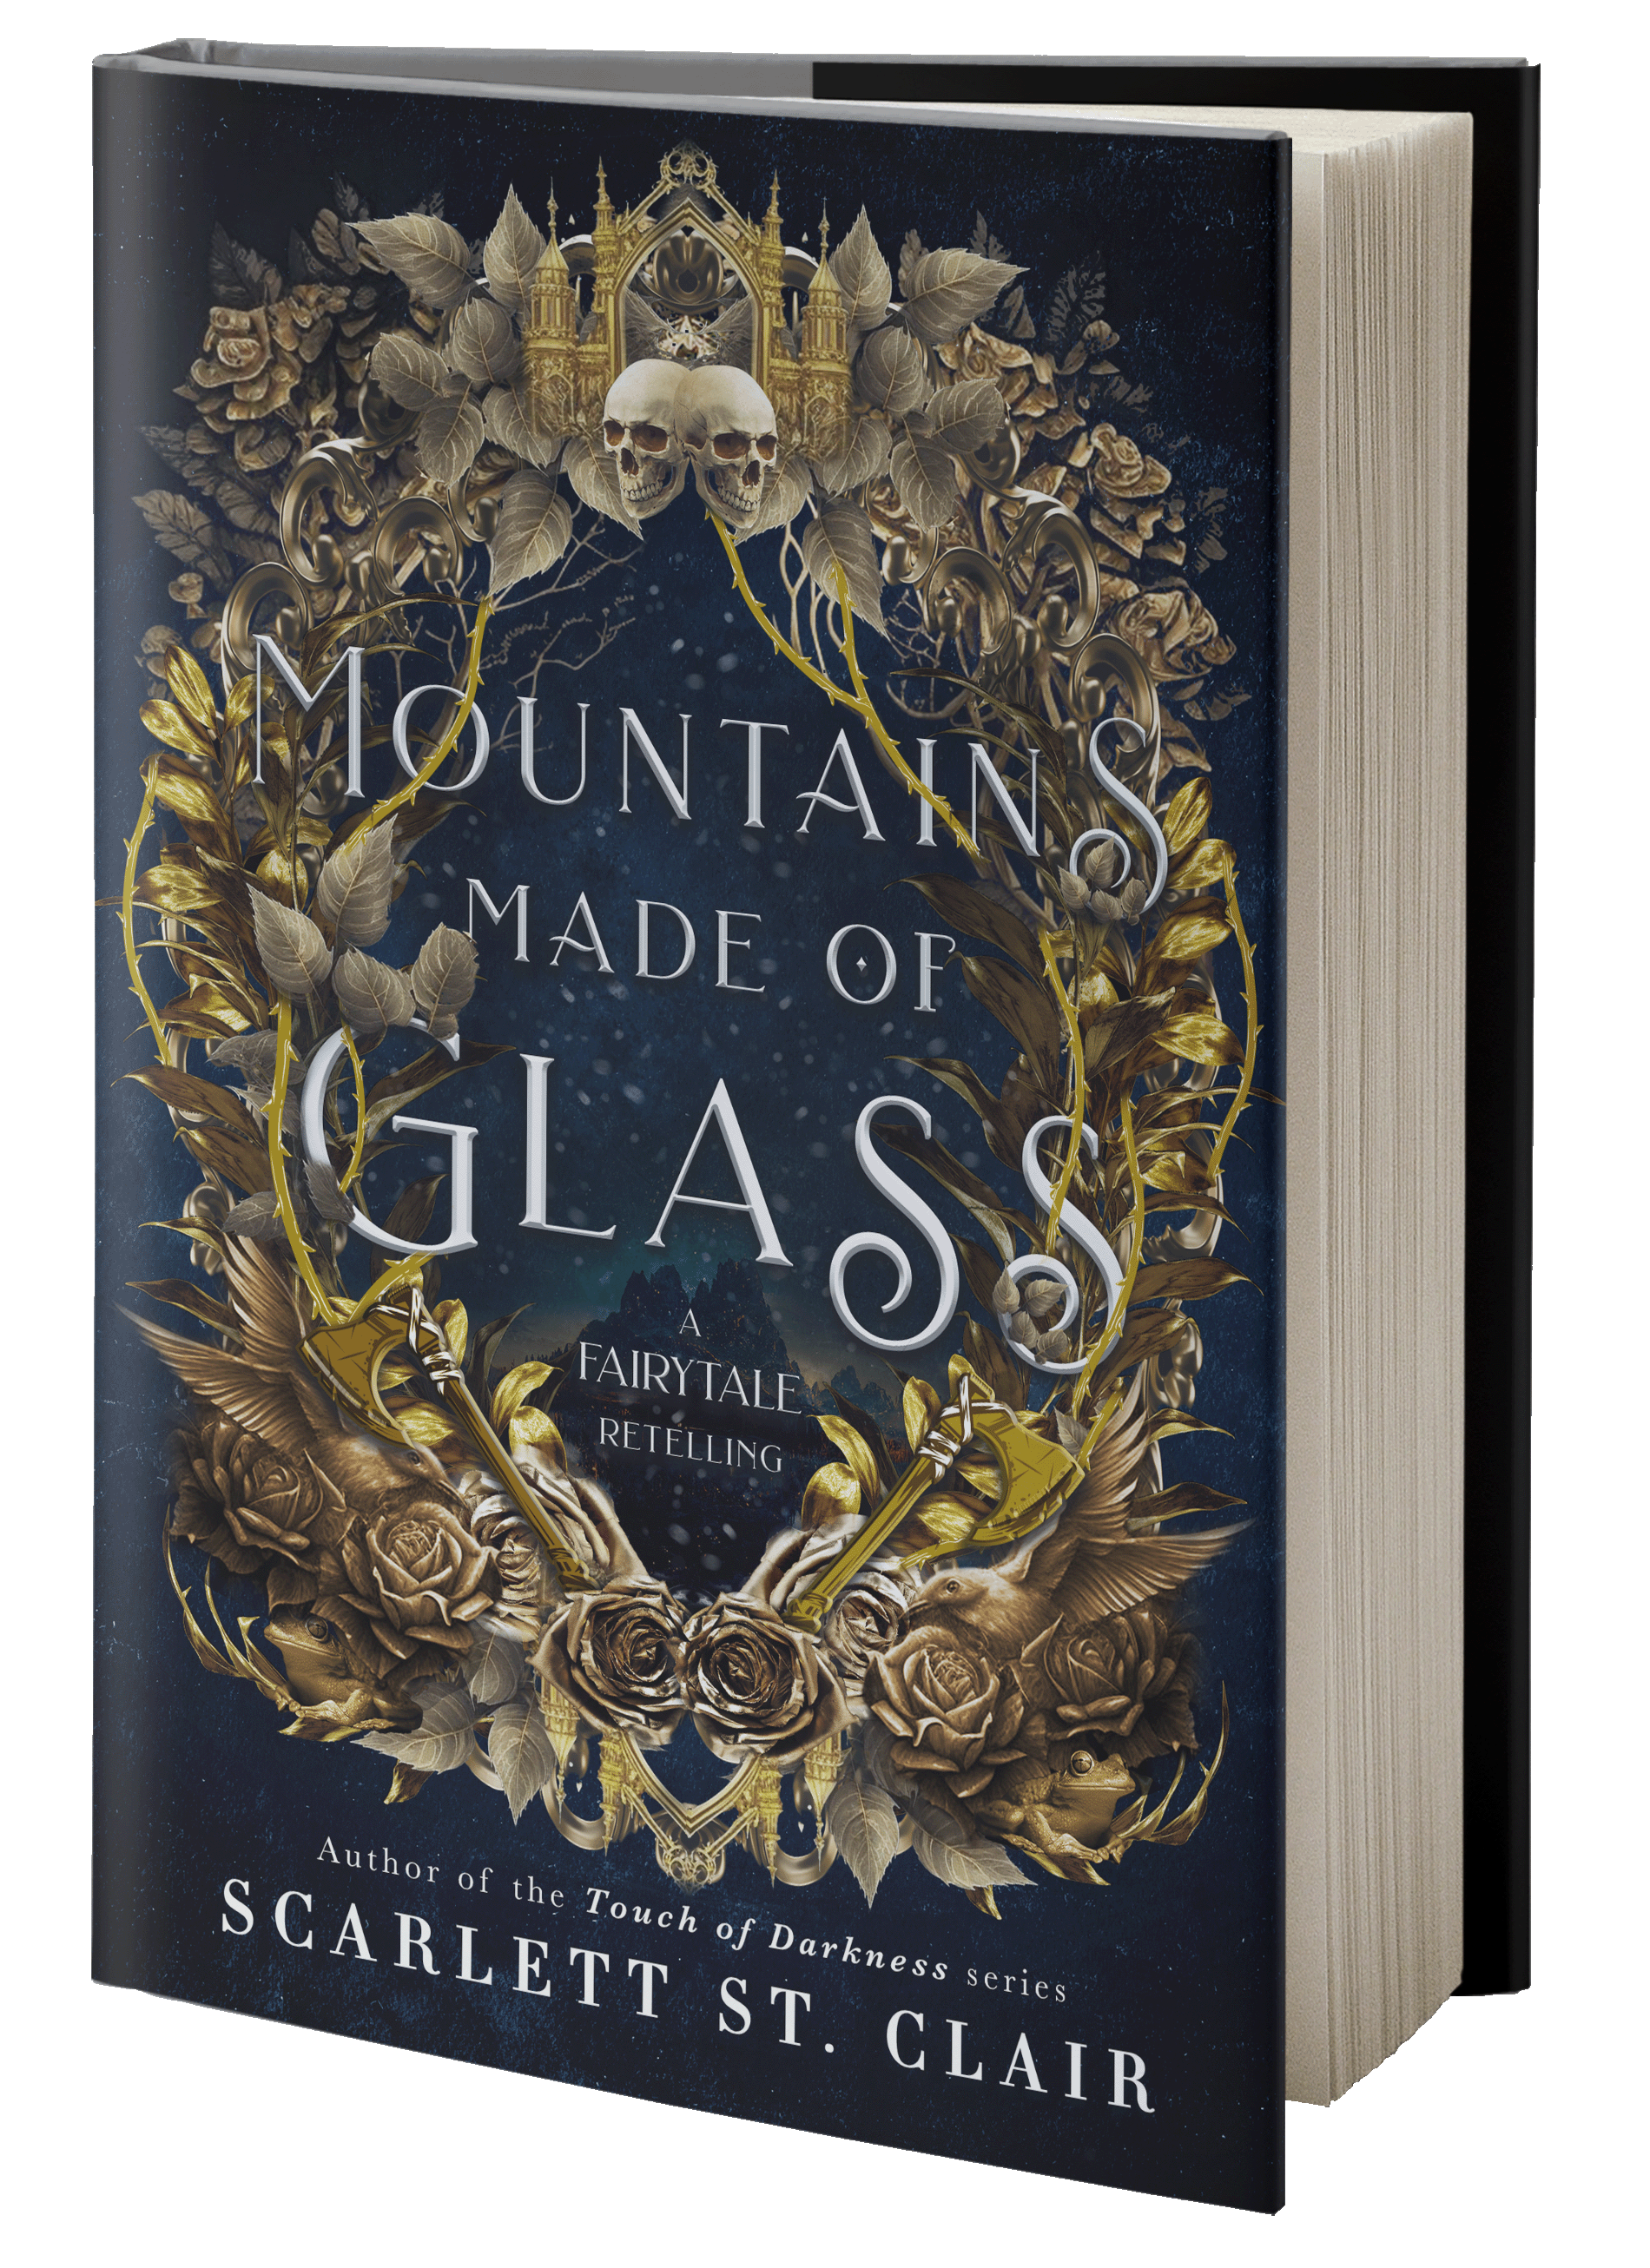 Book cover of "Mountains Made of Glass"